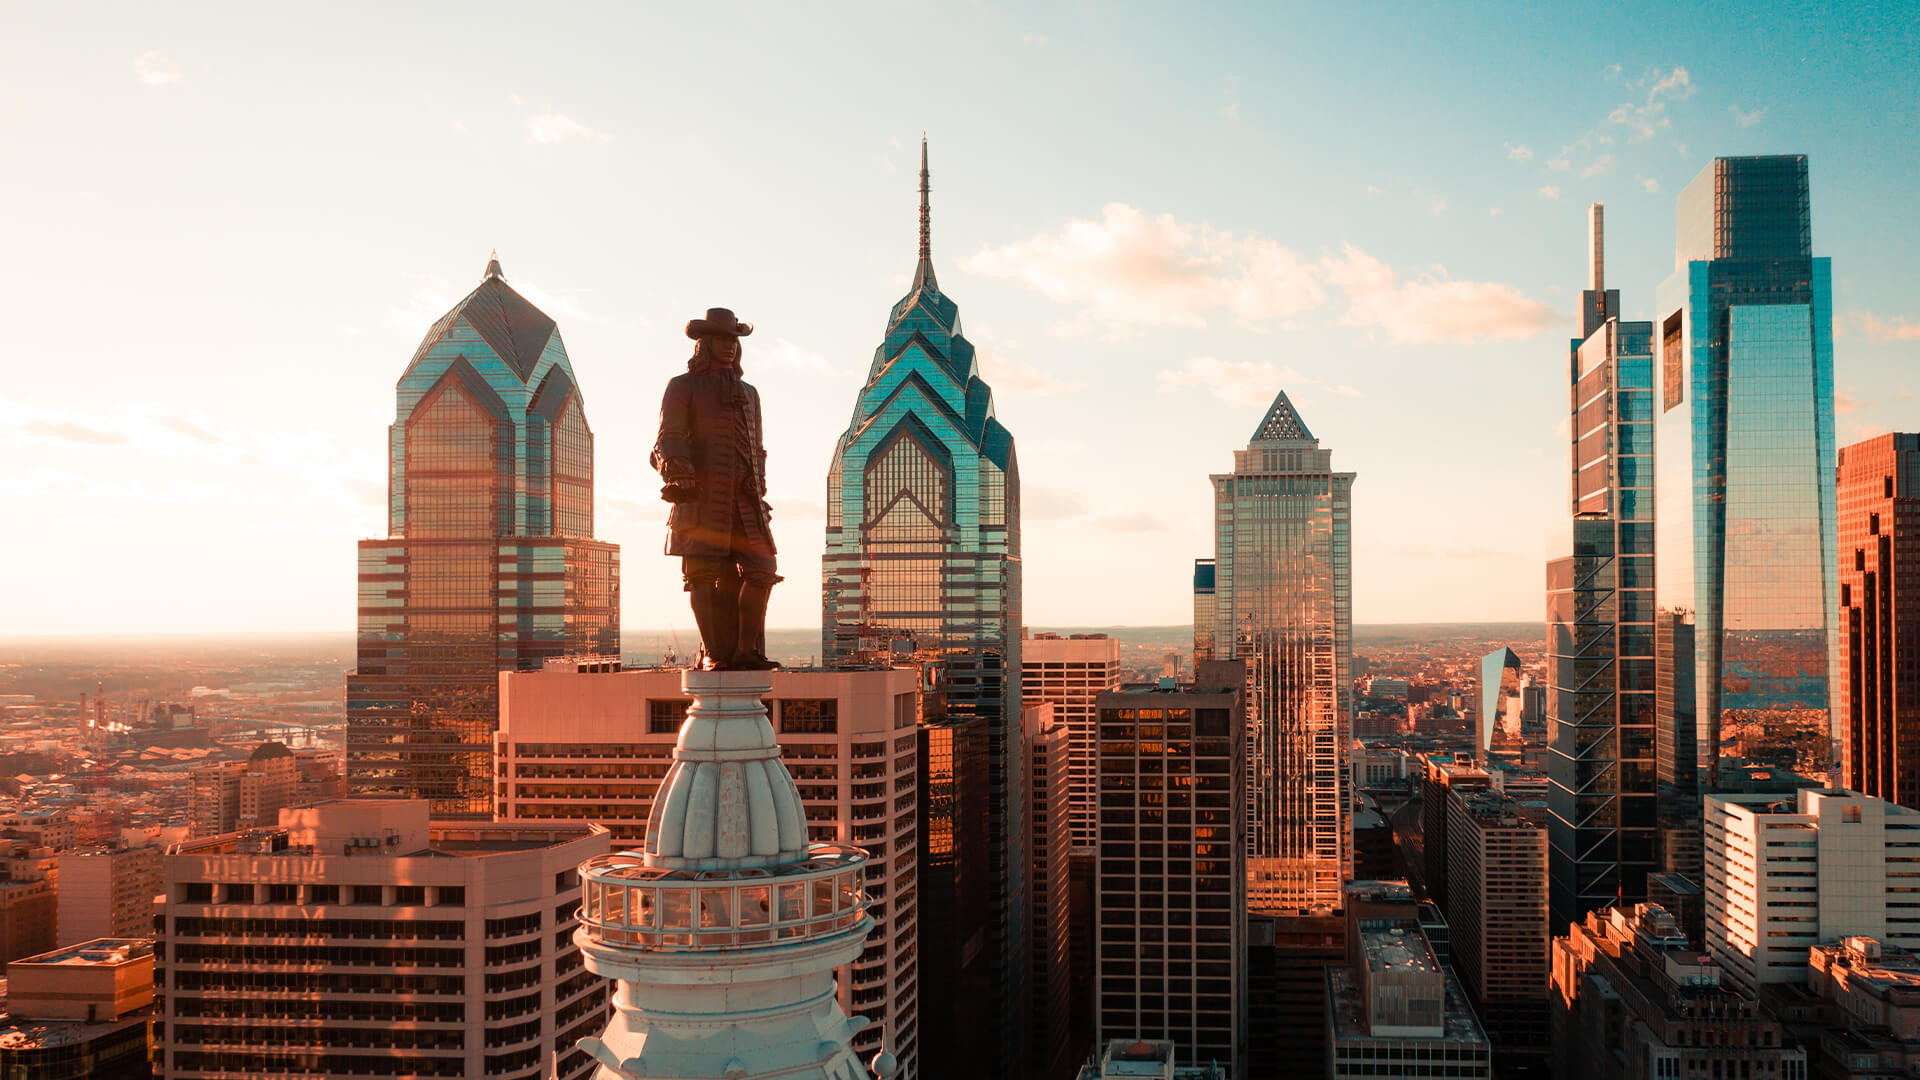 City skyline of Philadelphia in the late afternoon